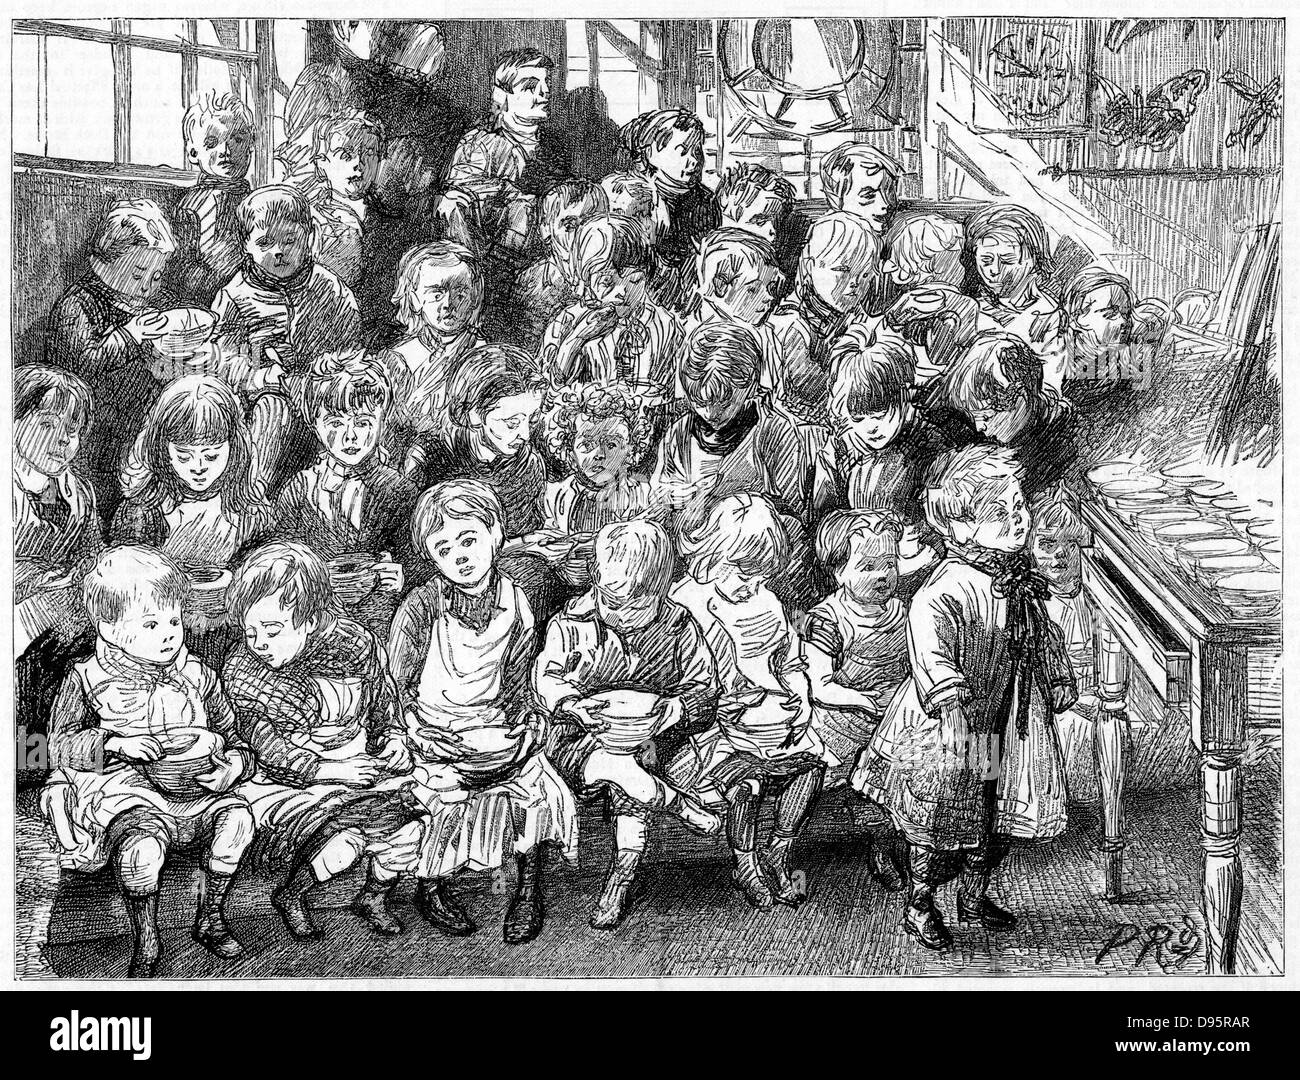 London Board School, Denmark Terrace, Islington:  Waiting for soup at dinner time.  From 'The Graphic' London 7 December 1889.  This soup was probably the most nourishing meal in the day for these children.  Wood engraving. Stock Photo